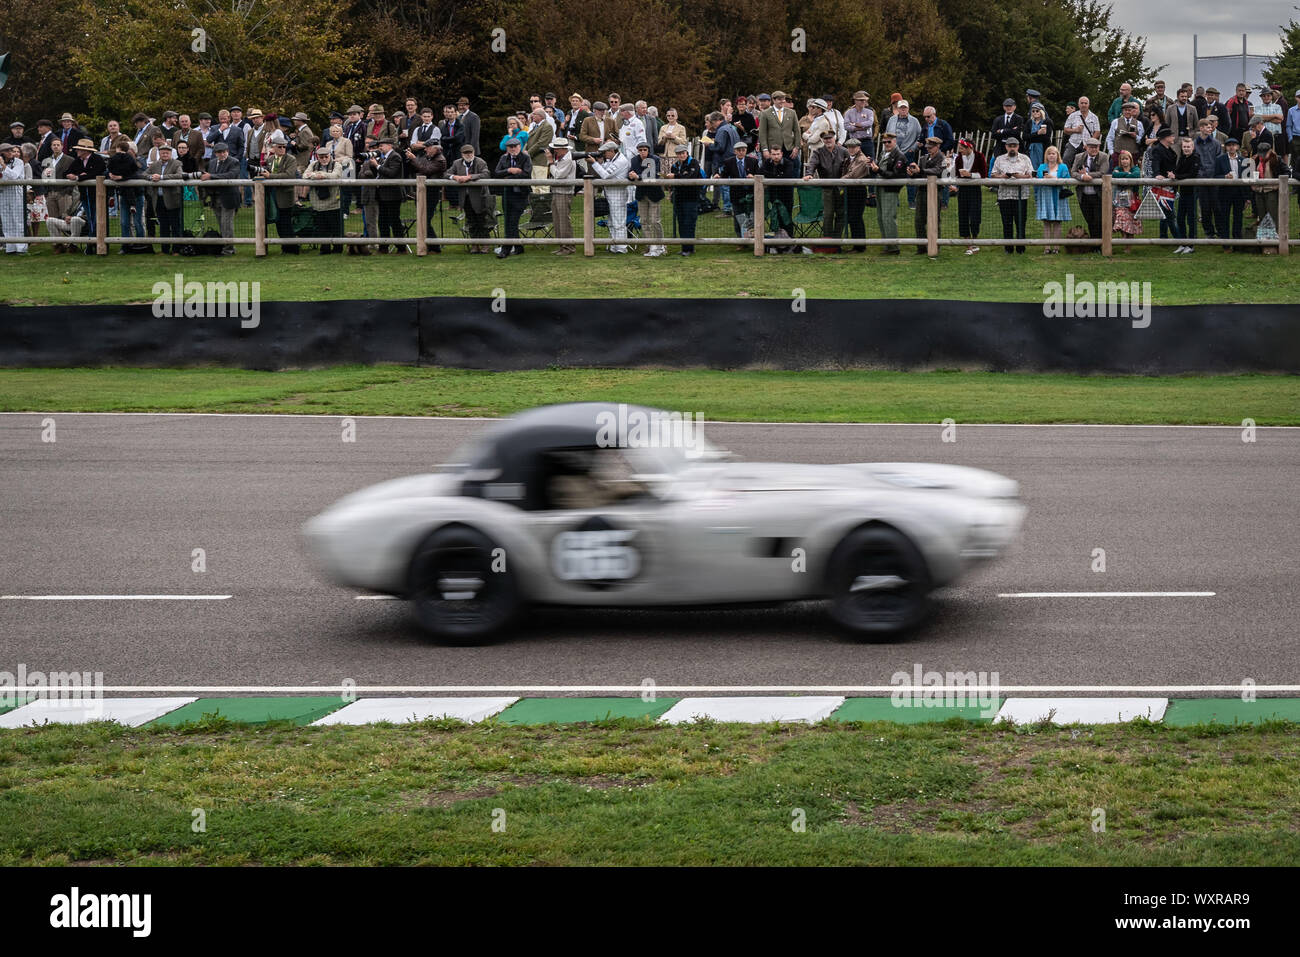 Vintage-themed Goodwood Revival. Britain’s greatest annual classic car show celebrates the mid-20th-century heyday of the Goodwood racing circuit. Stock Photo